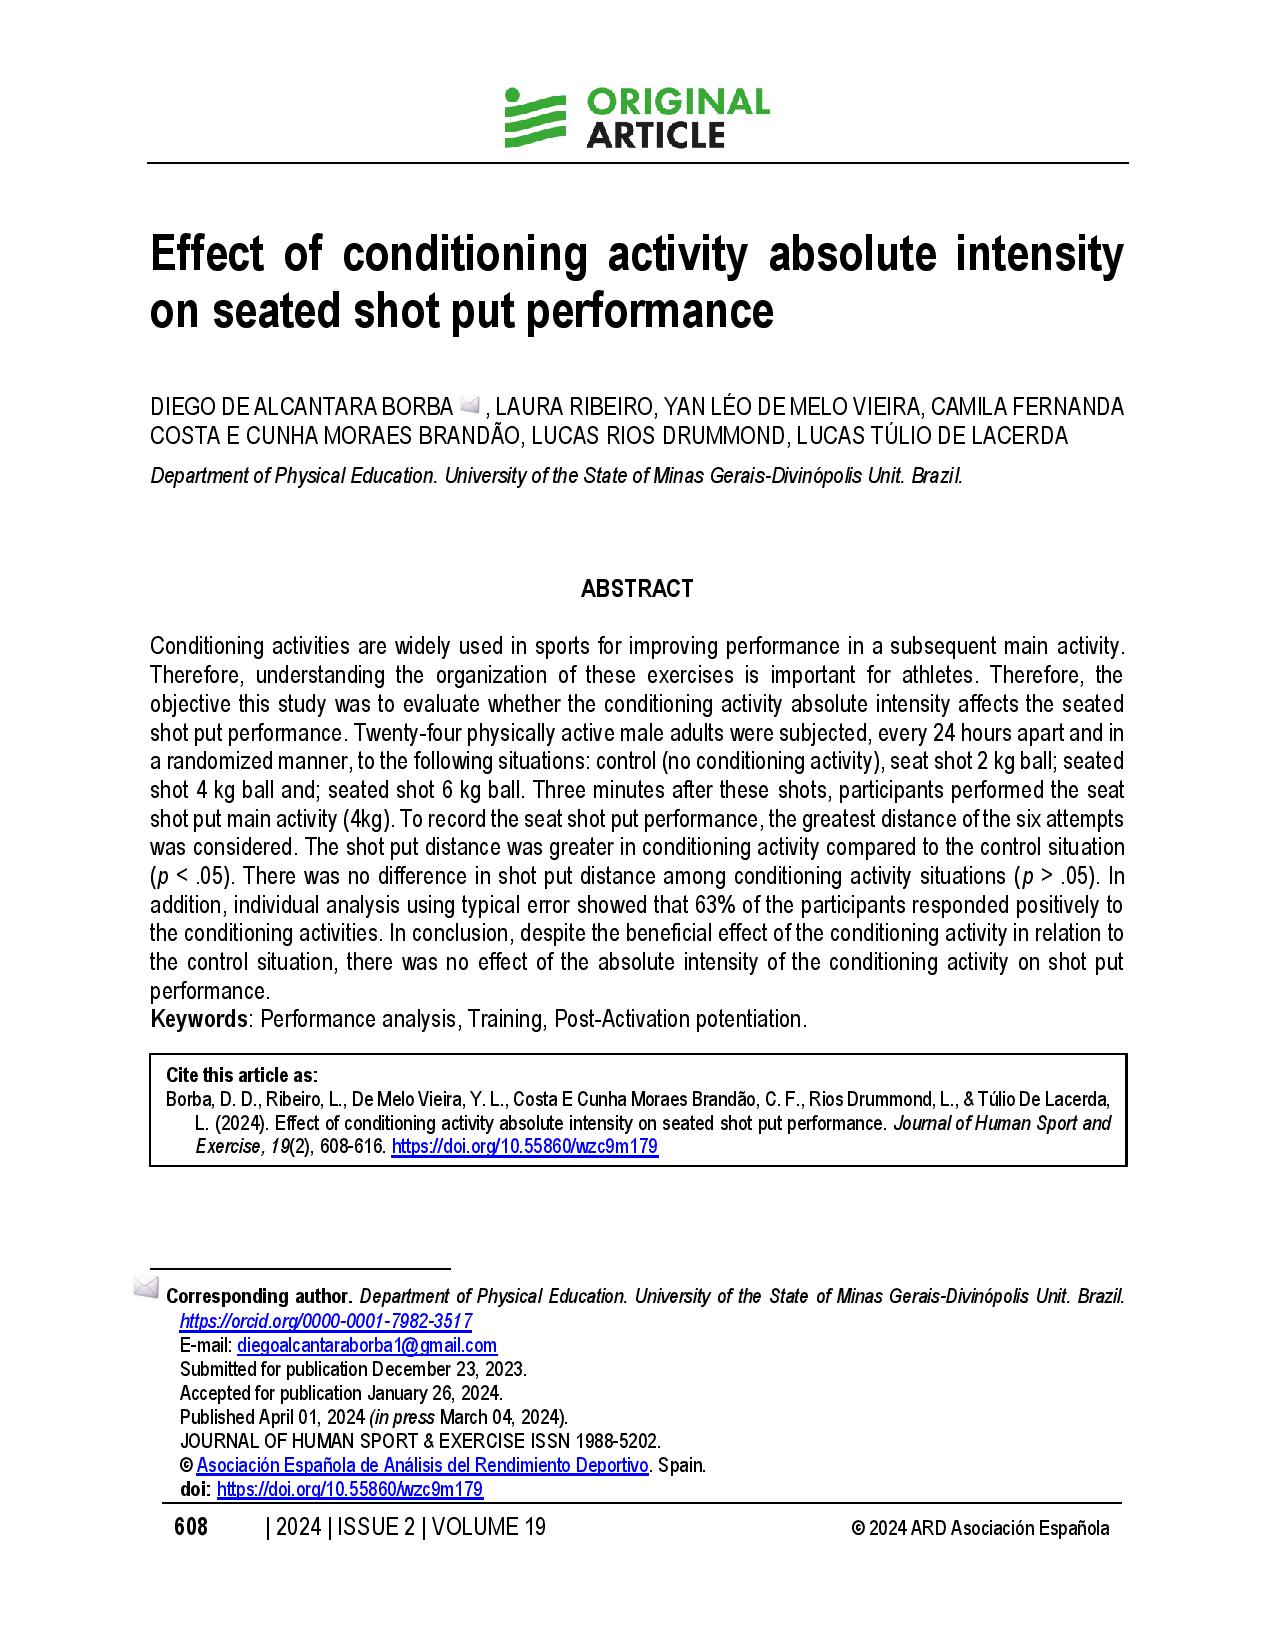 Effect of conditioning activity absolute intensity on seated shot put performance